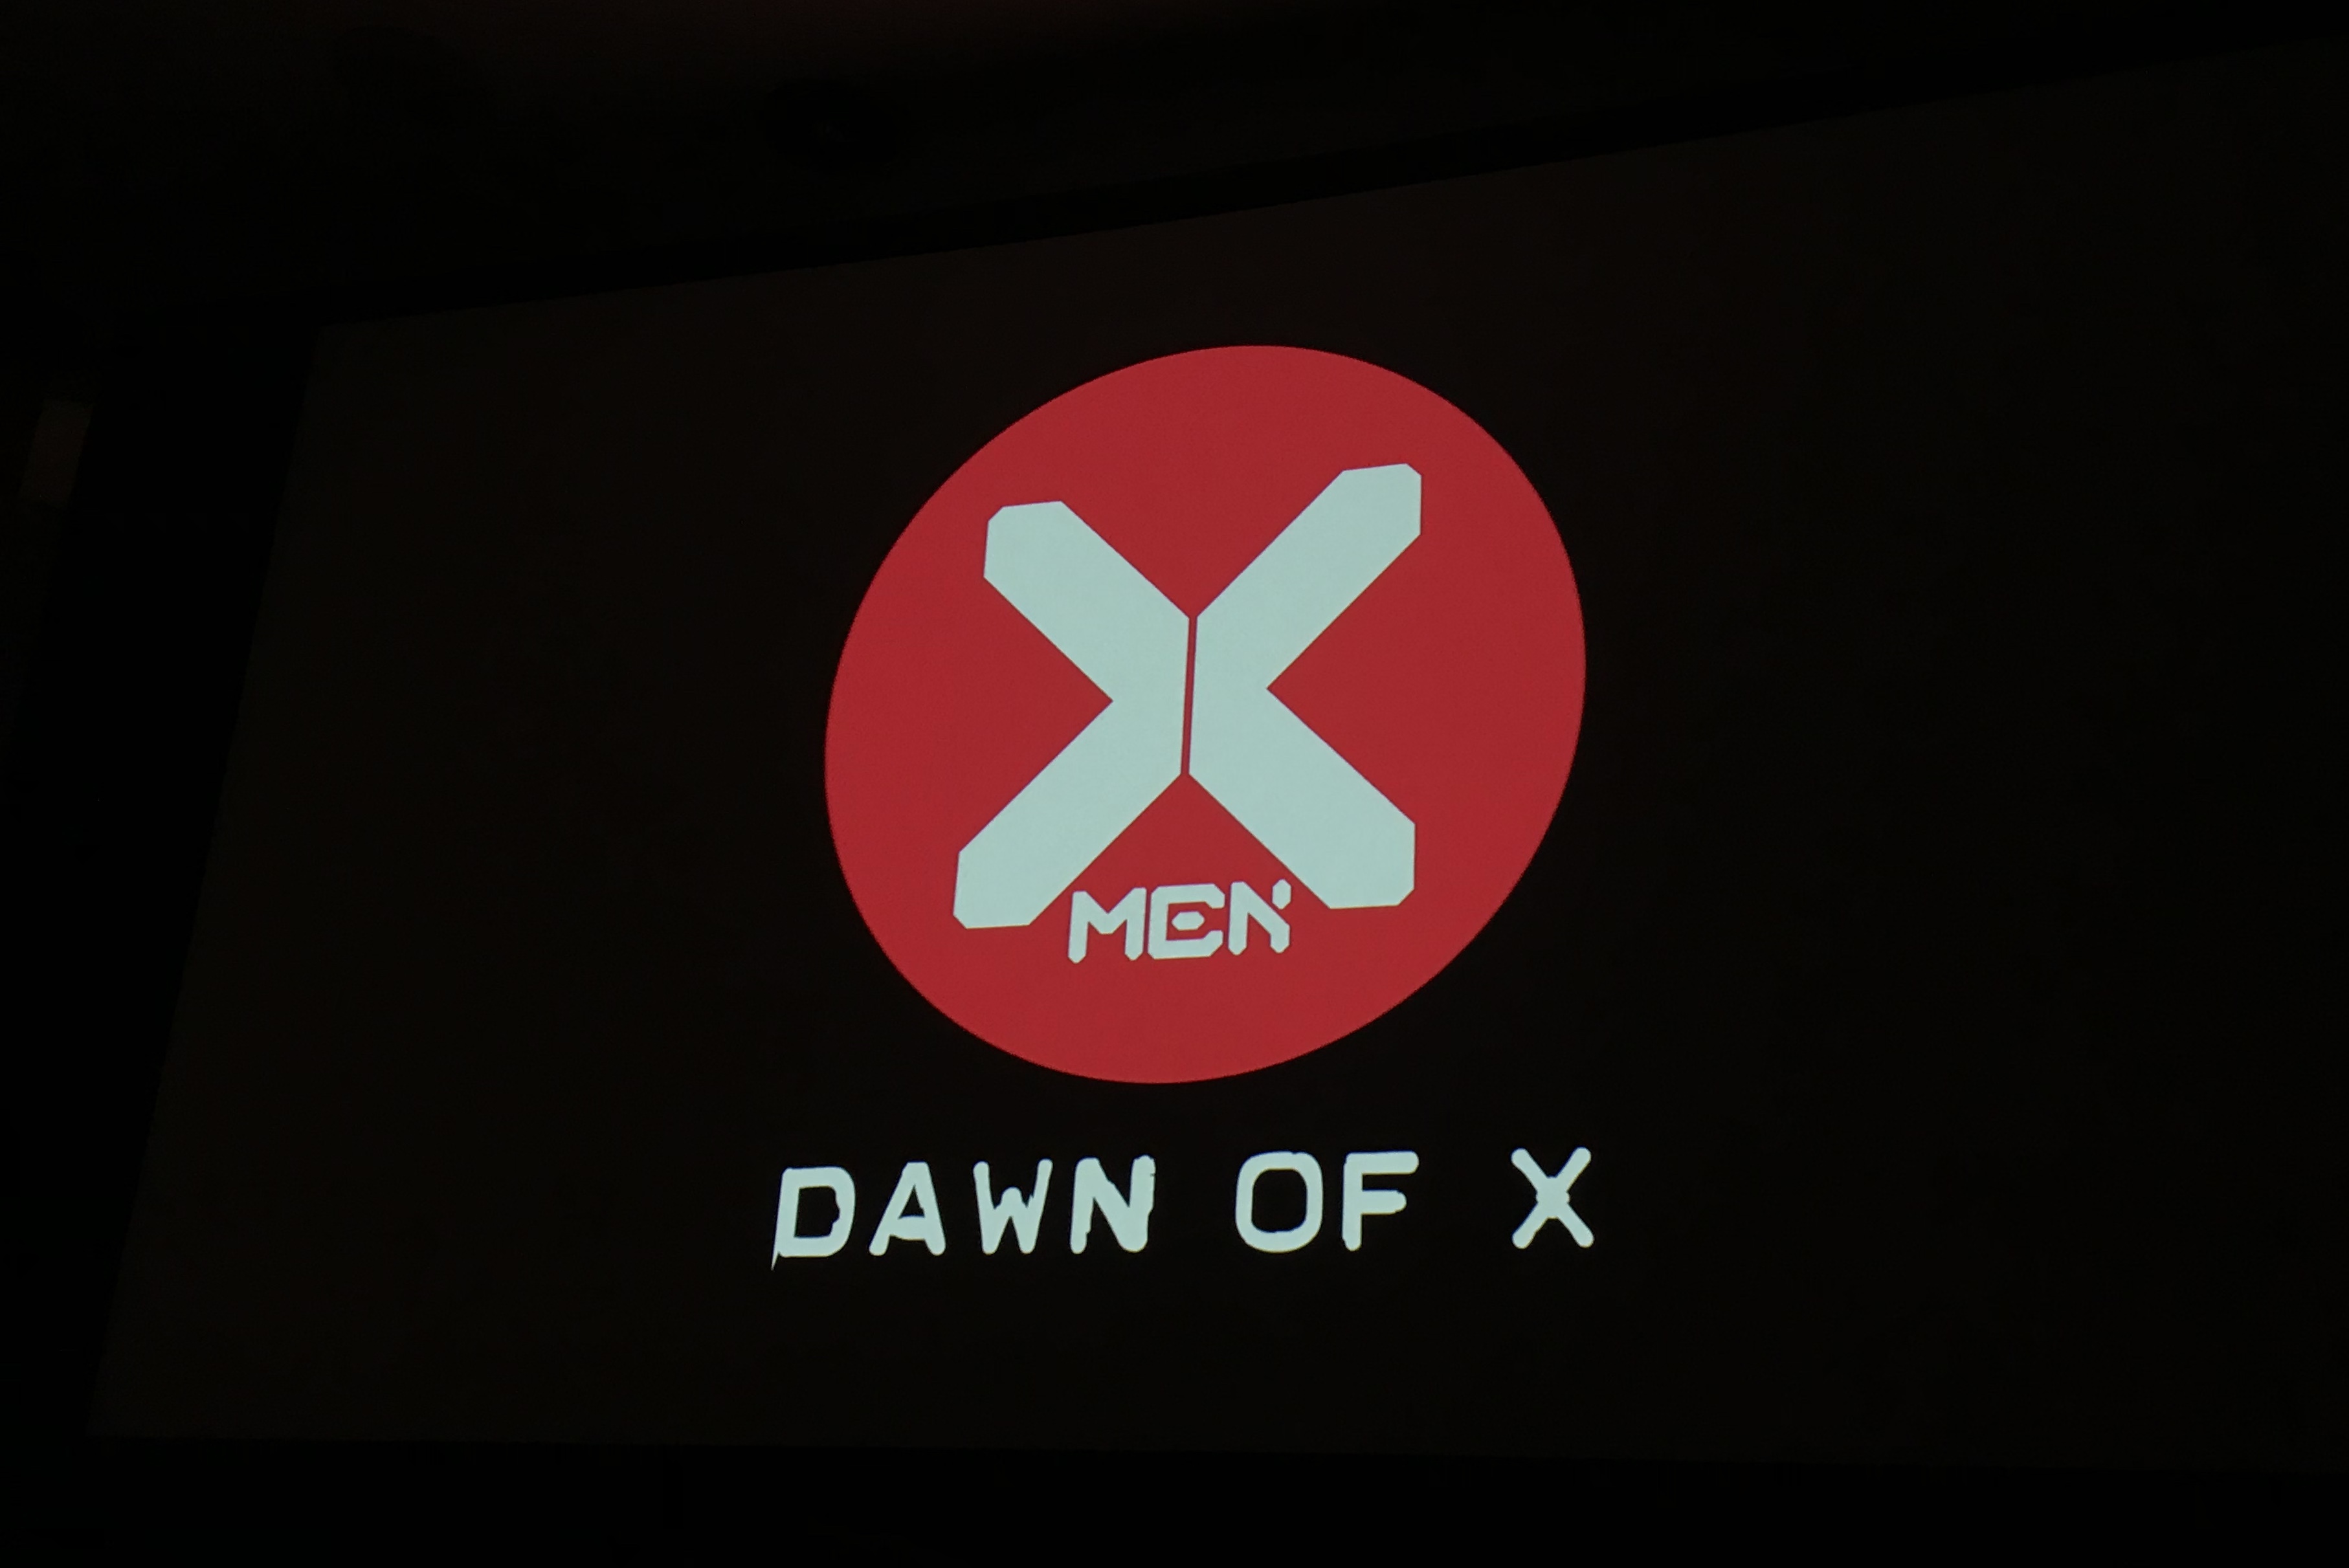 NYCC 2019: All of the new art shared at Marvel's Dawn of X panel